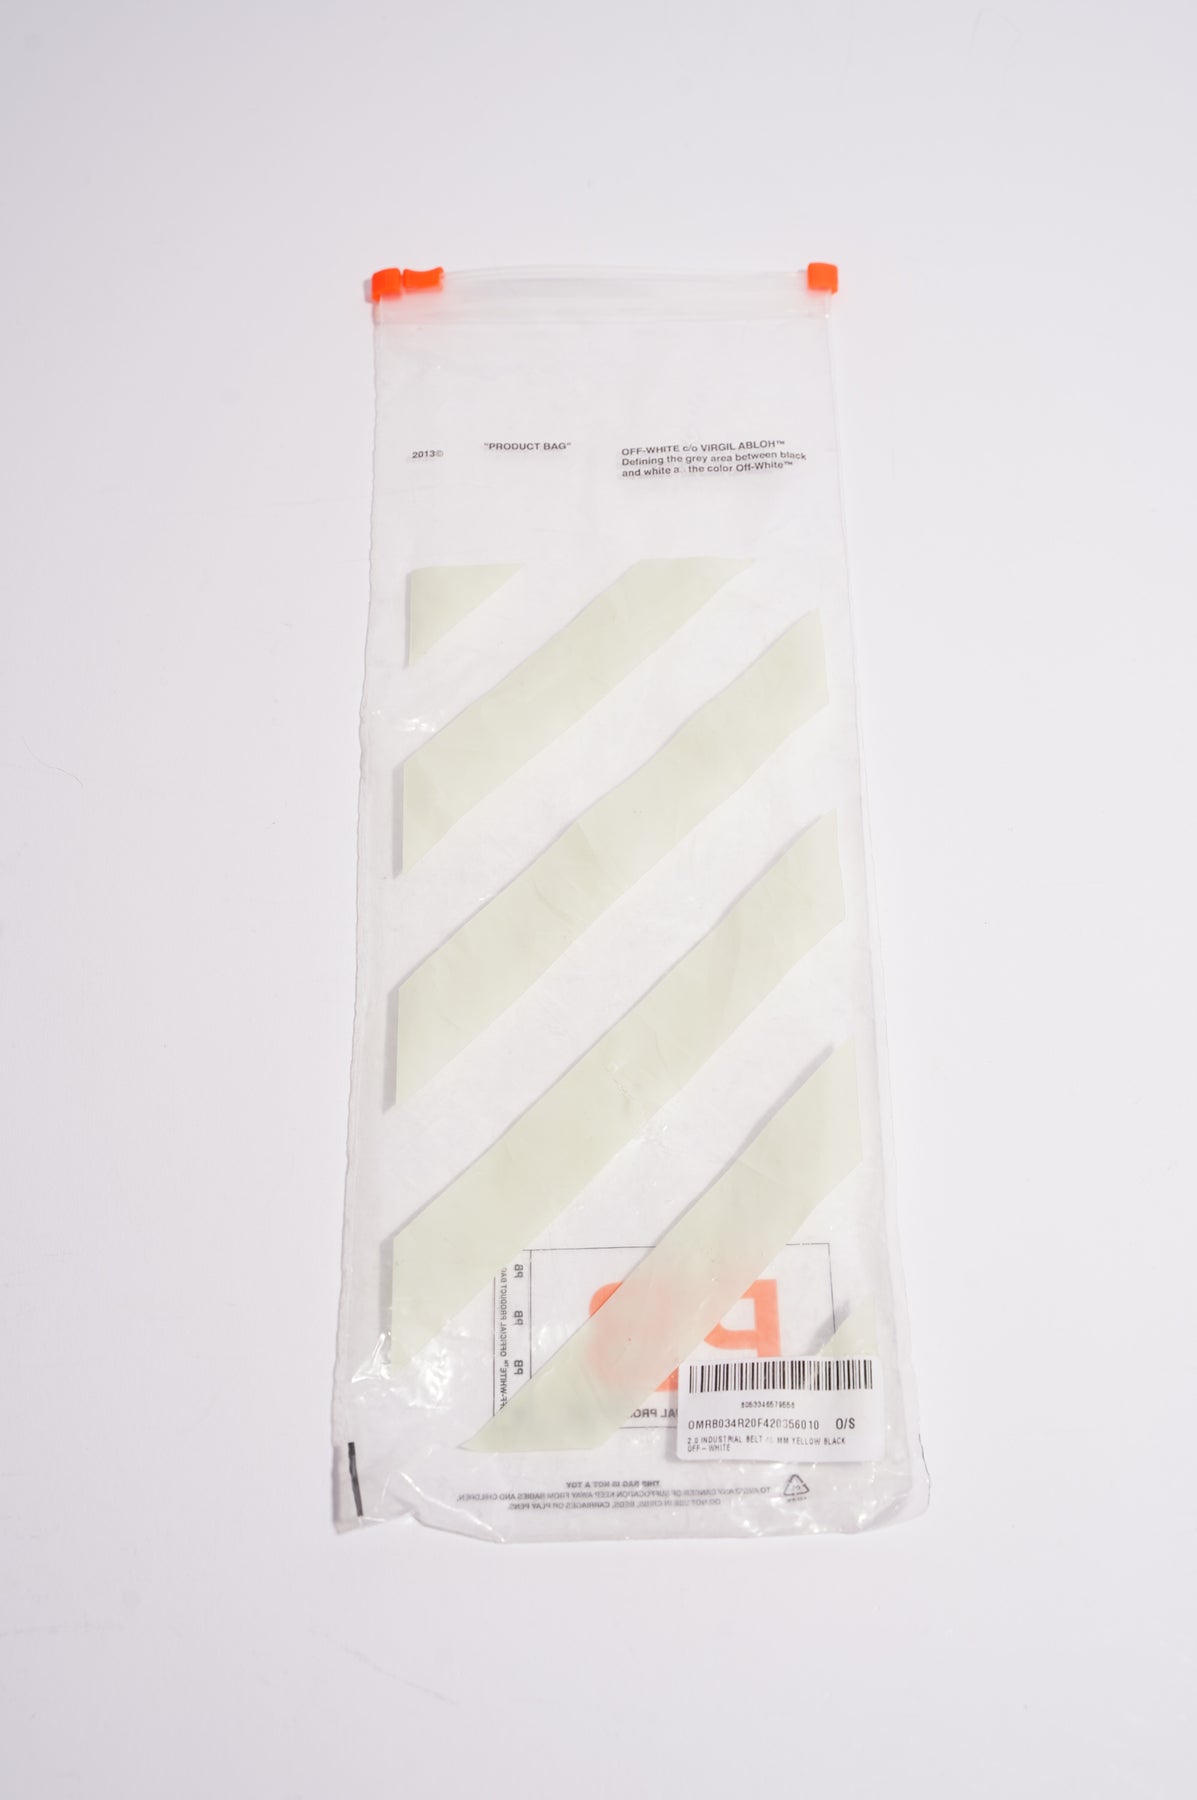 OFF-WHITE 2.0 Mini Yellow Industrial Short Belt - Wrong Weather